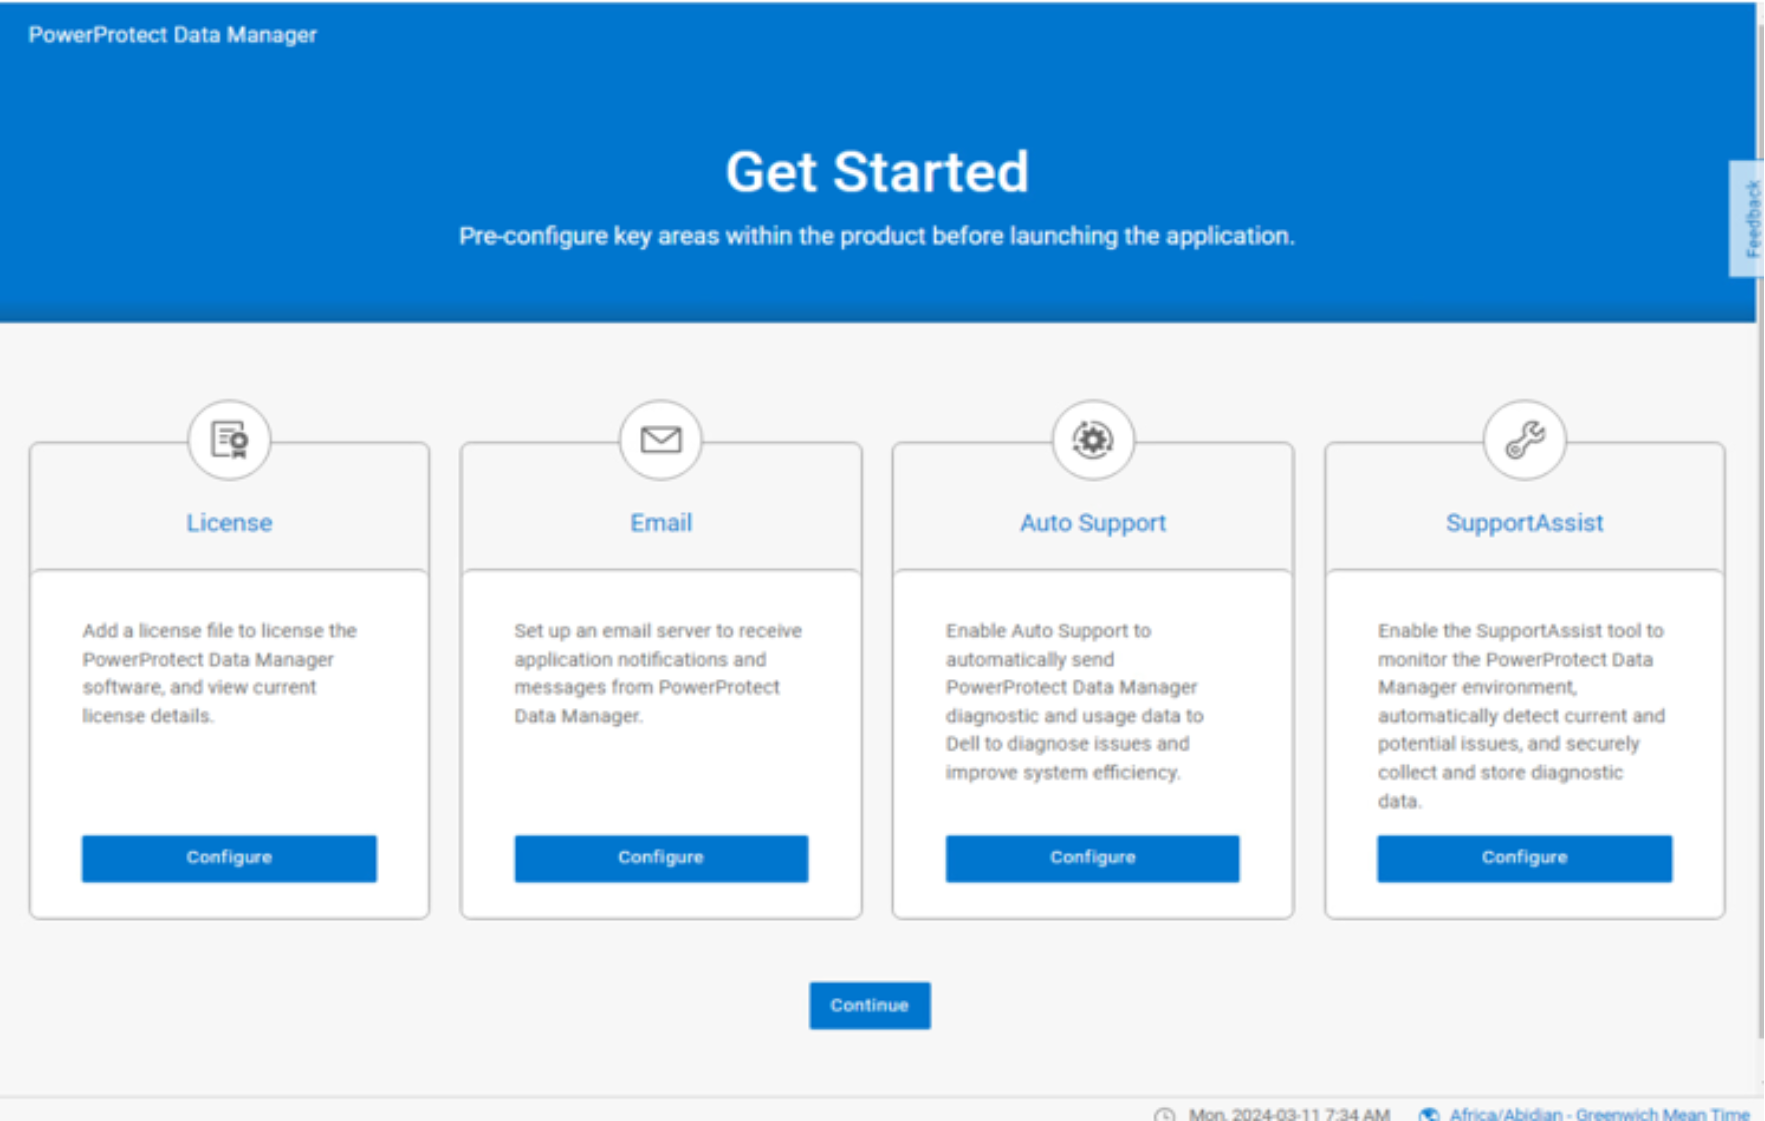 This figure shows the Get Started Page